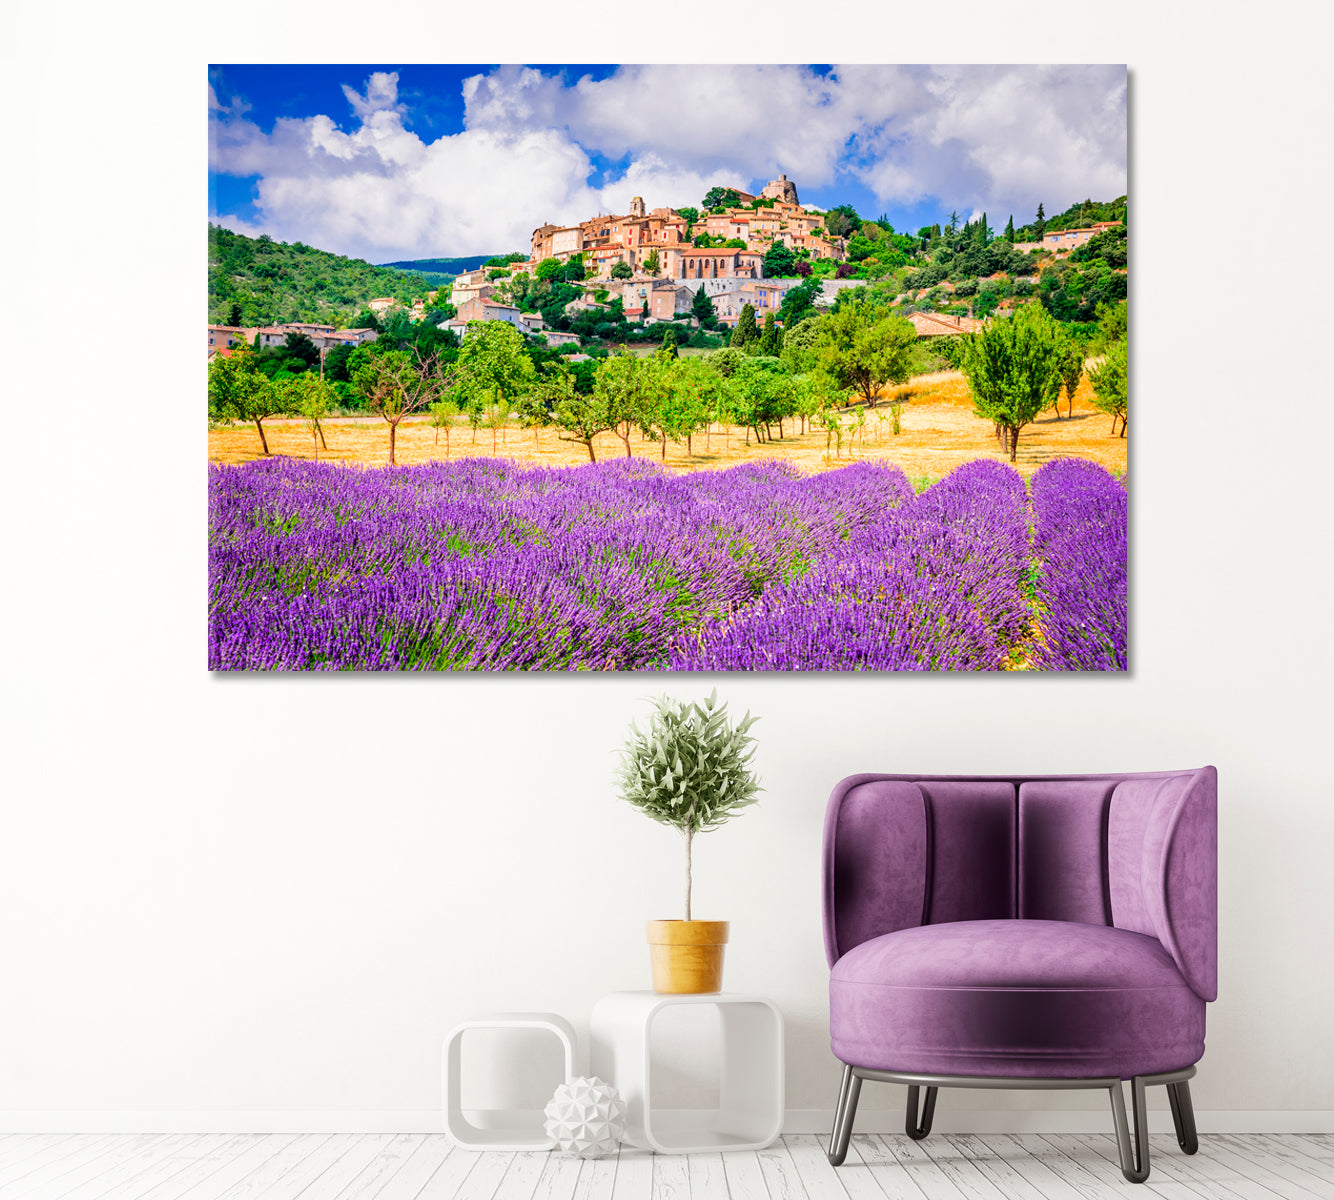 Simiane La Rotonde Village in Provence with Lavender Fields France Canvas Print ArtLexy 1 Panel 24"x16" inches 